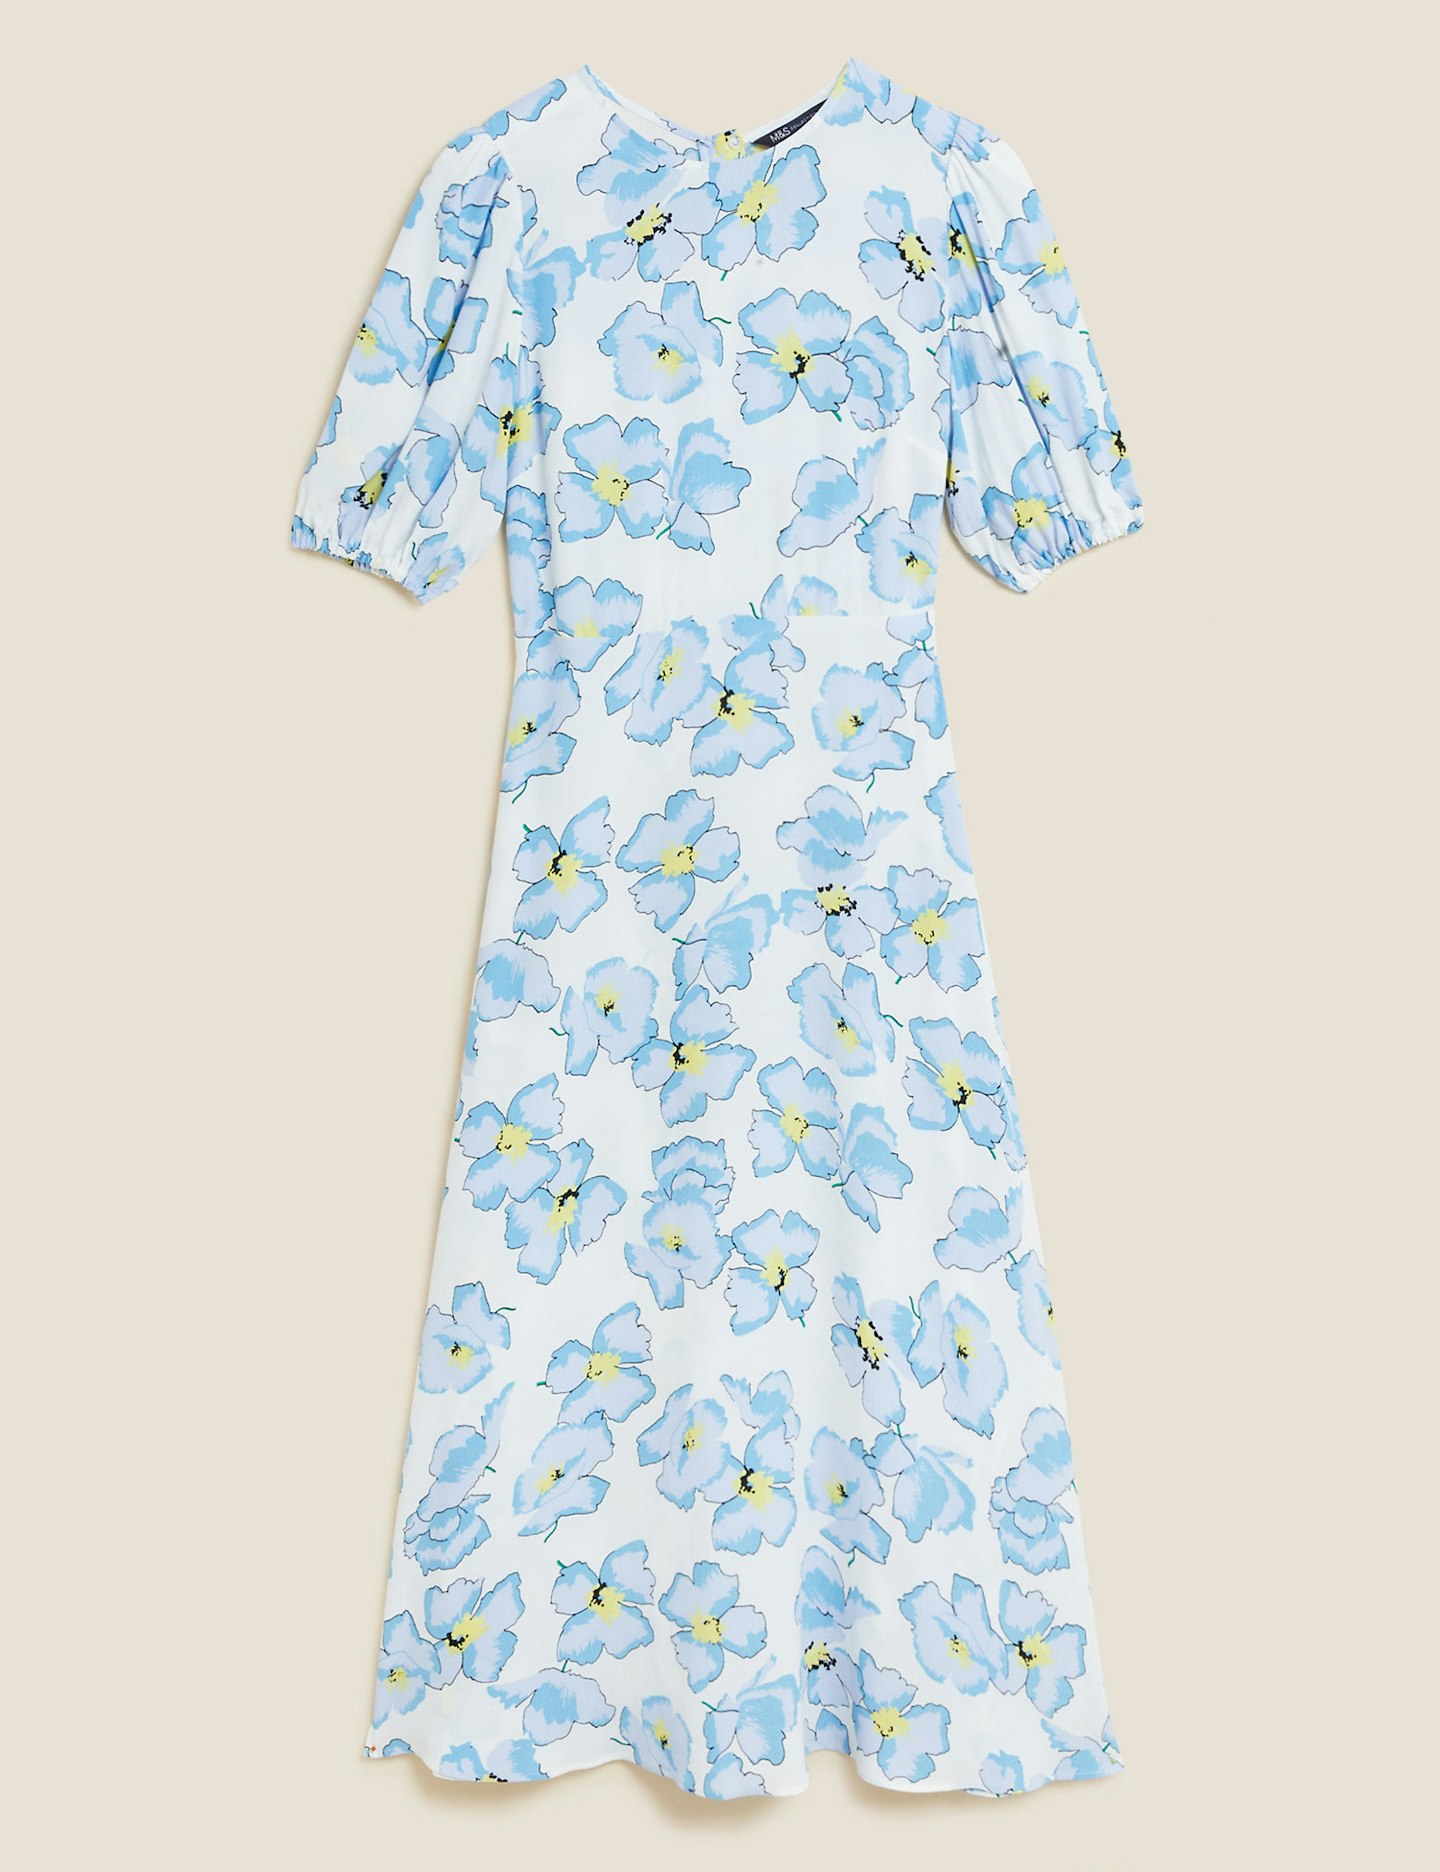 Holly Willoughby marks and Spencer summer edit Floral Round Neck Midaxi Tea Dress, £39.50